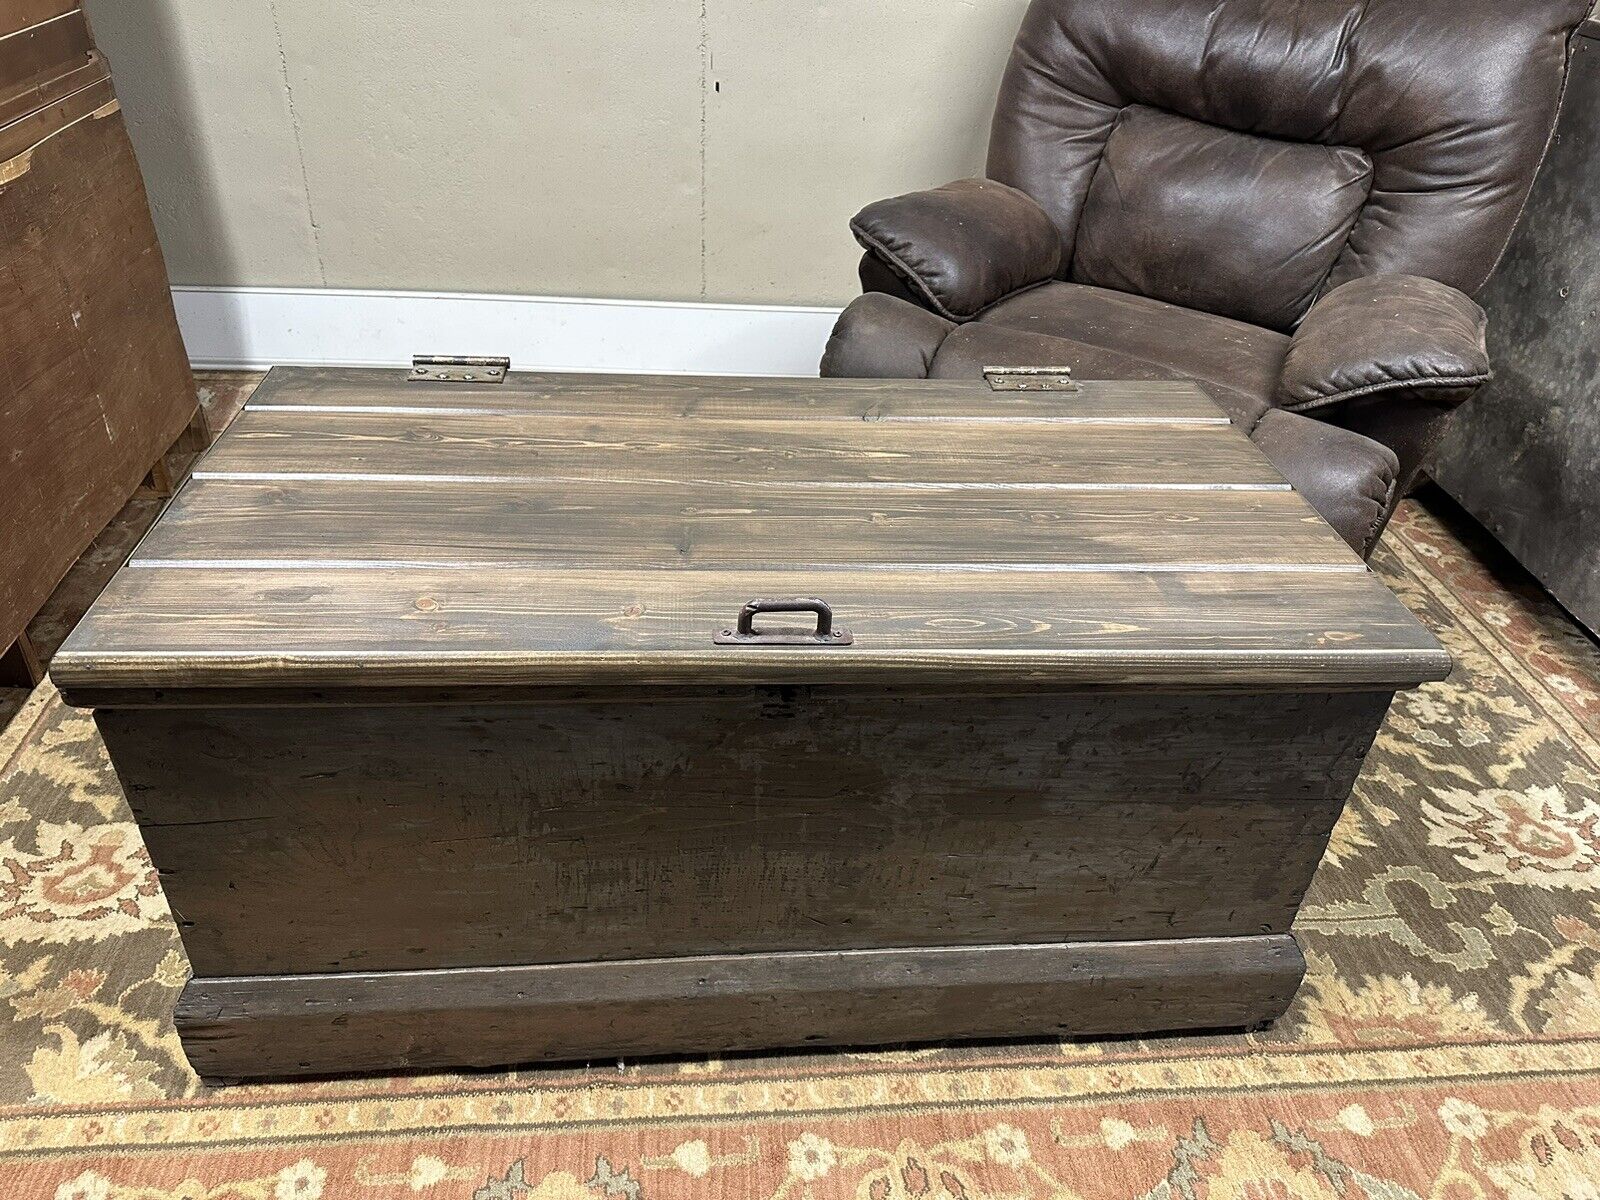 Antique Trunk Chest Large, Made with square nails, Lid Has Been Replaced.